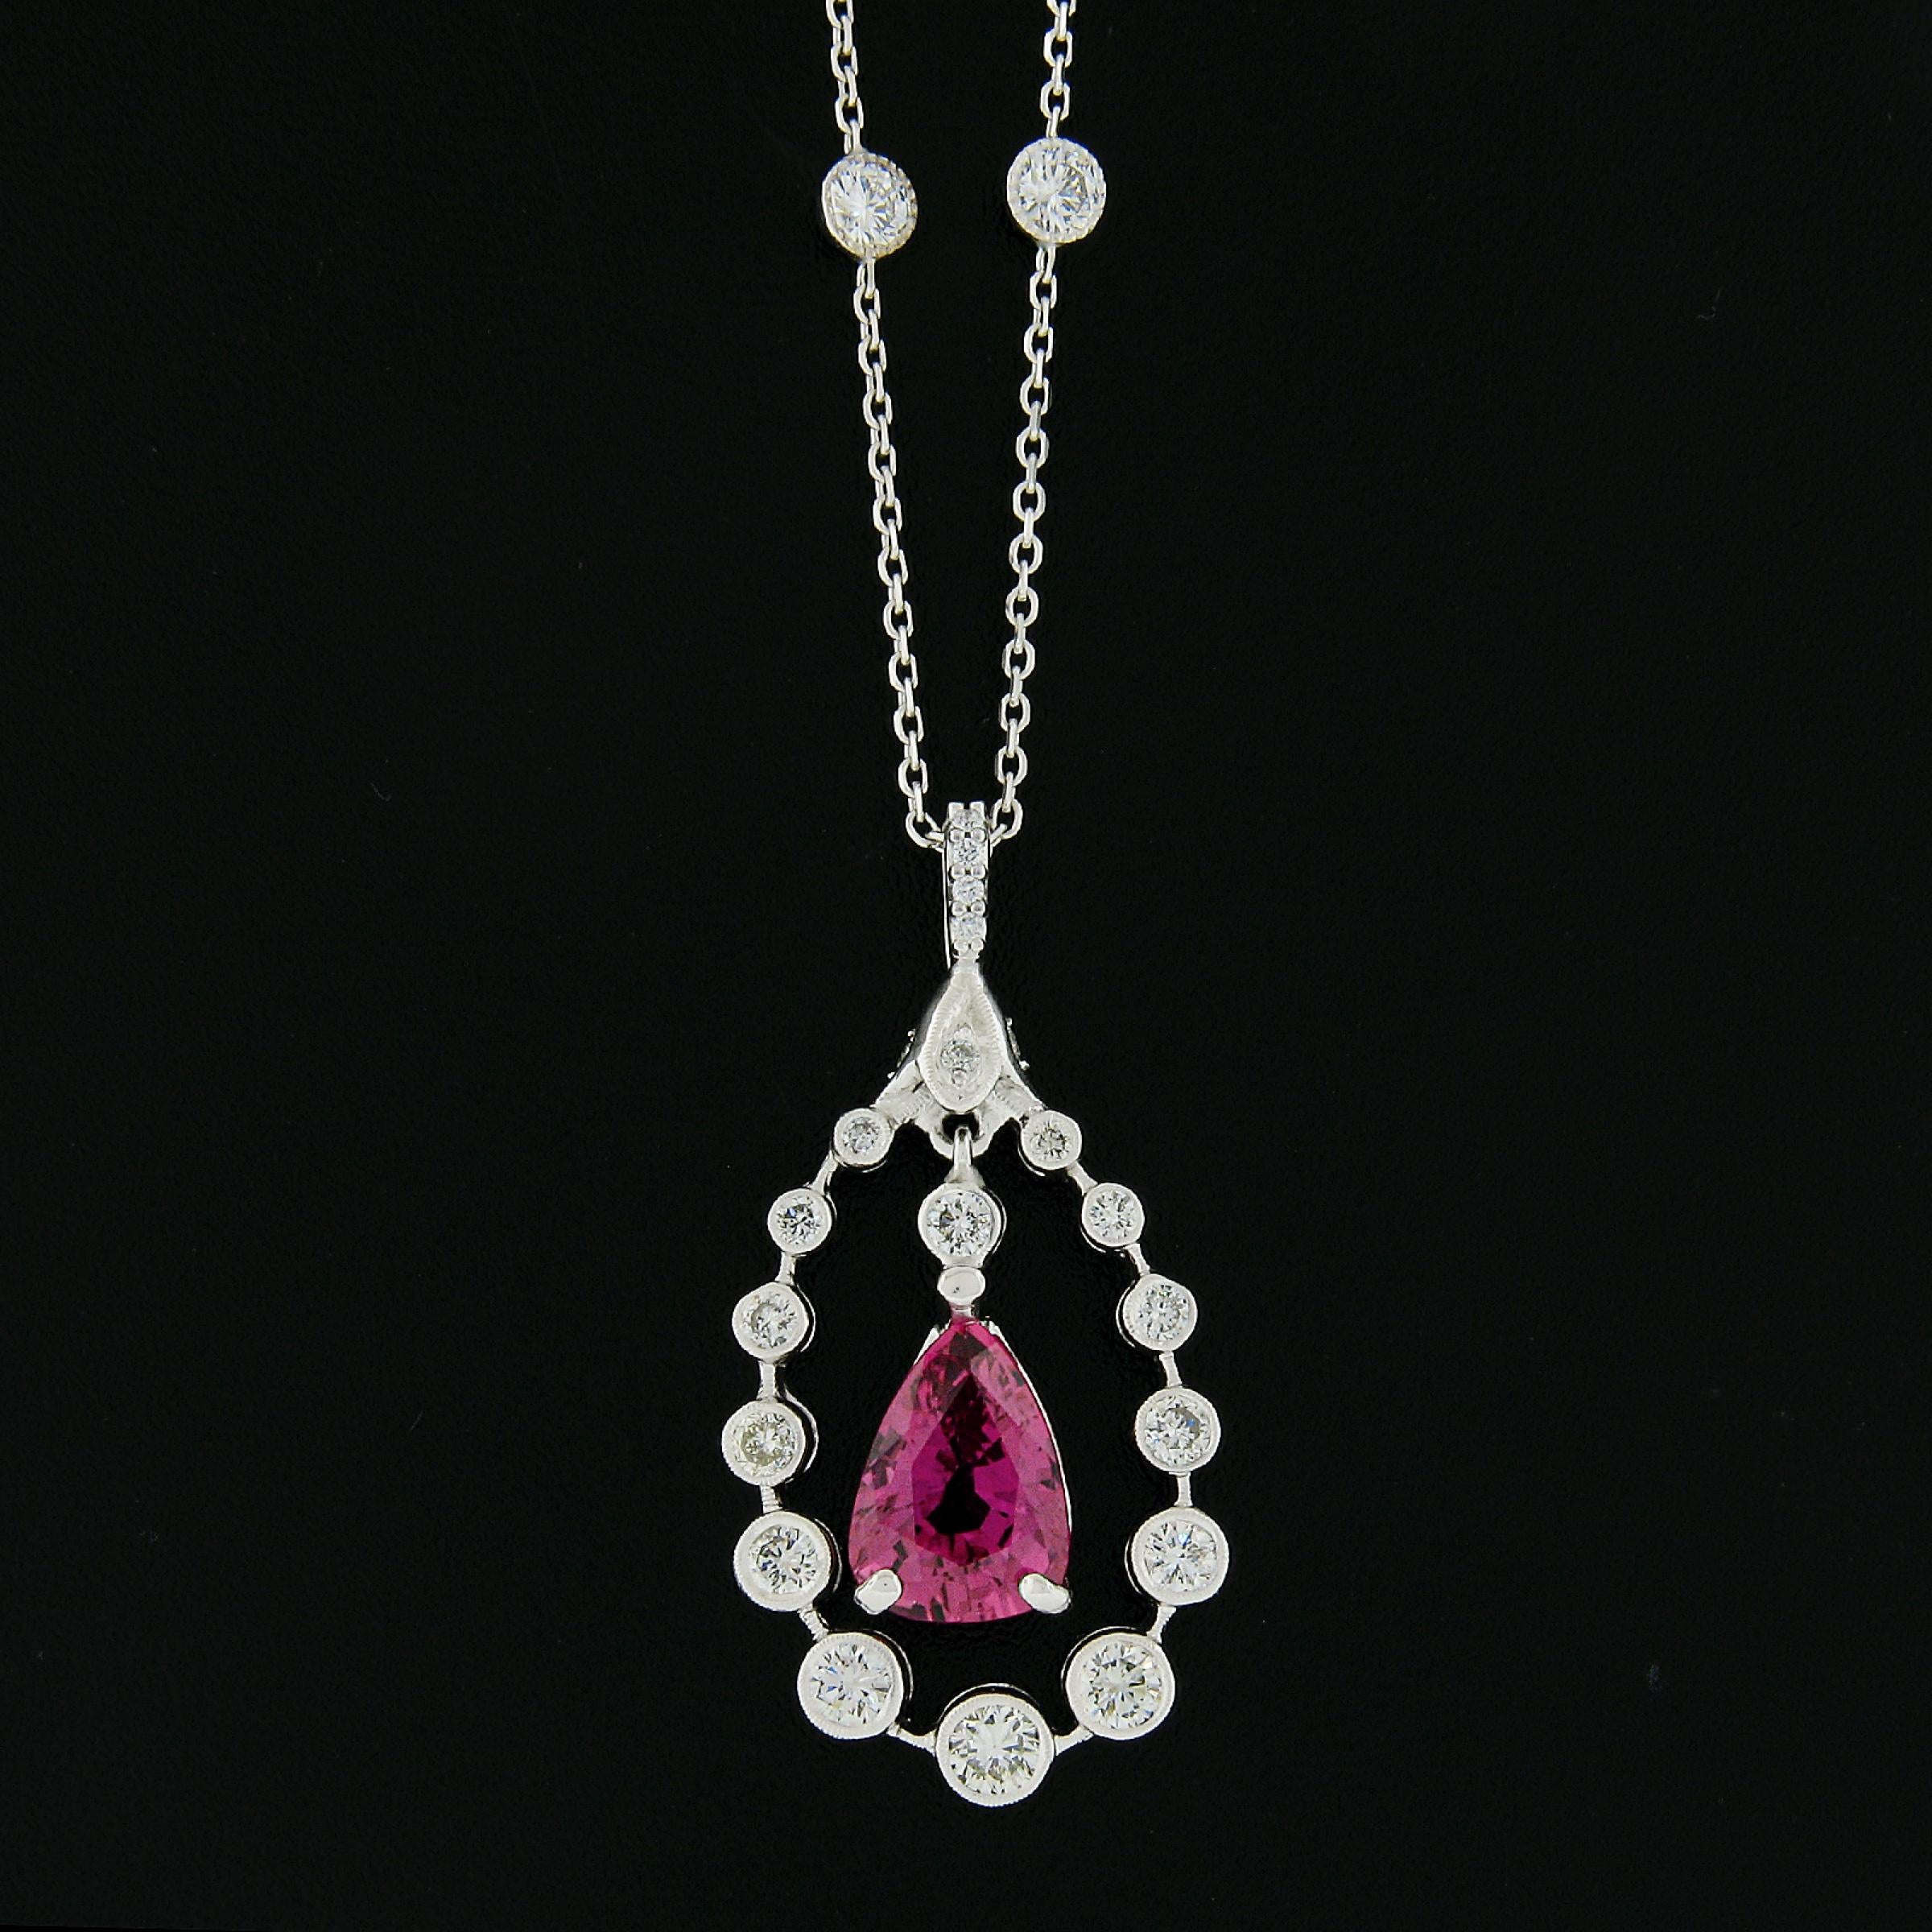 18K White Gold 4.12ctw GIA Pear Ruby & Diamond Halo Pendant By the Yard Necklace In Excellent Condition For Sale In Montclair, NJ